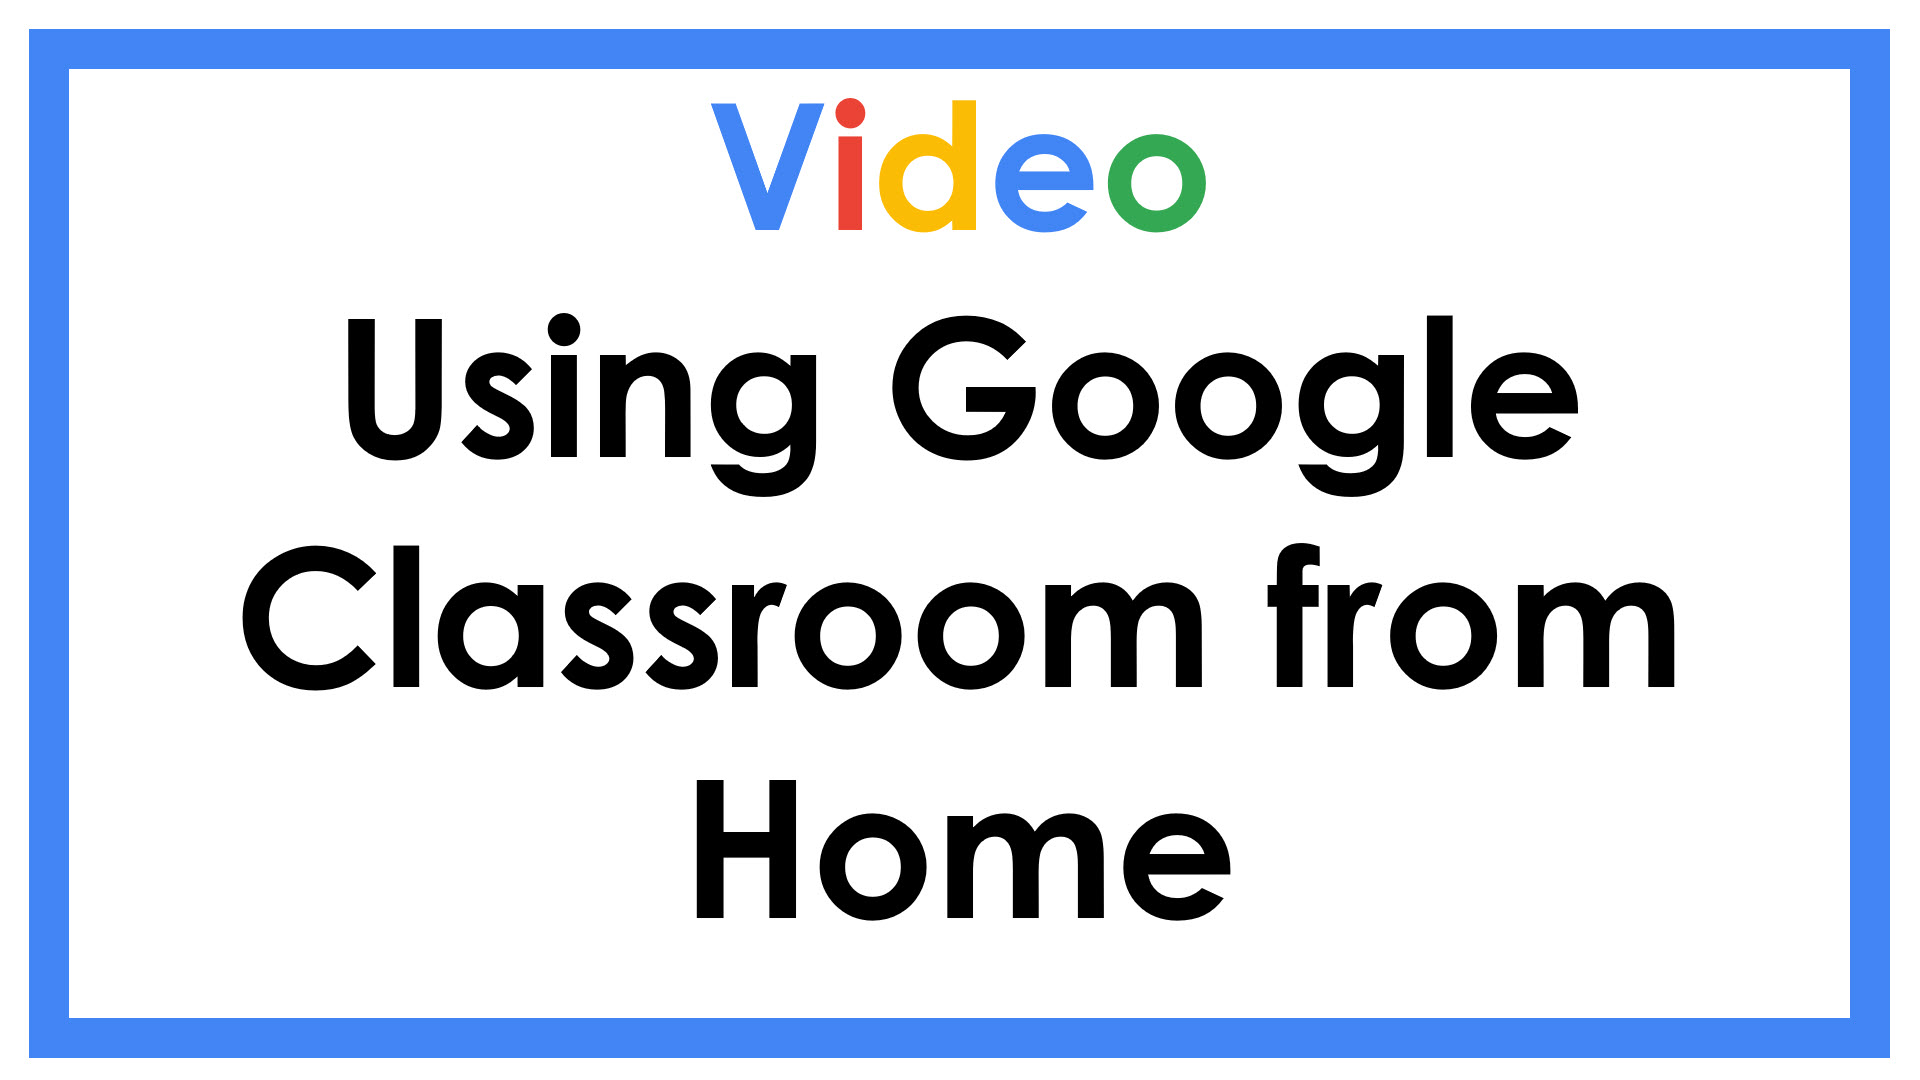 Video Using Google Classroom from Home